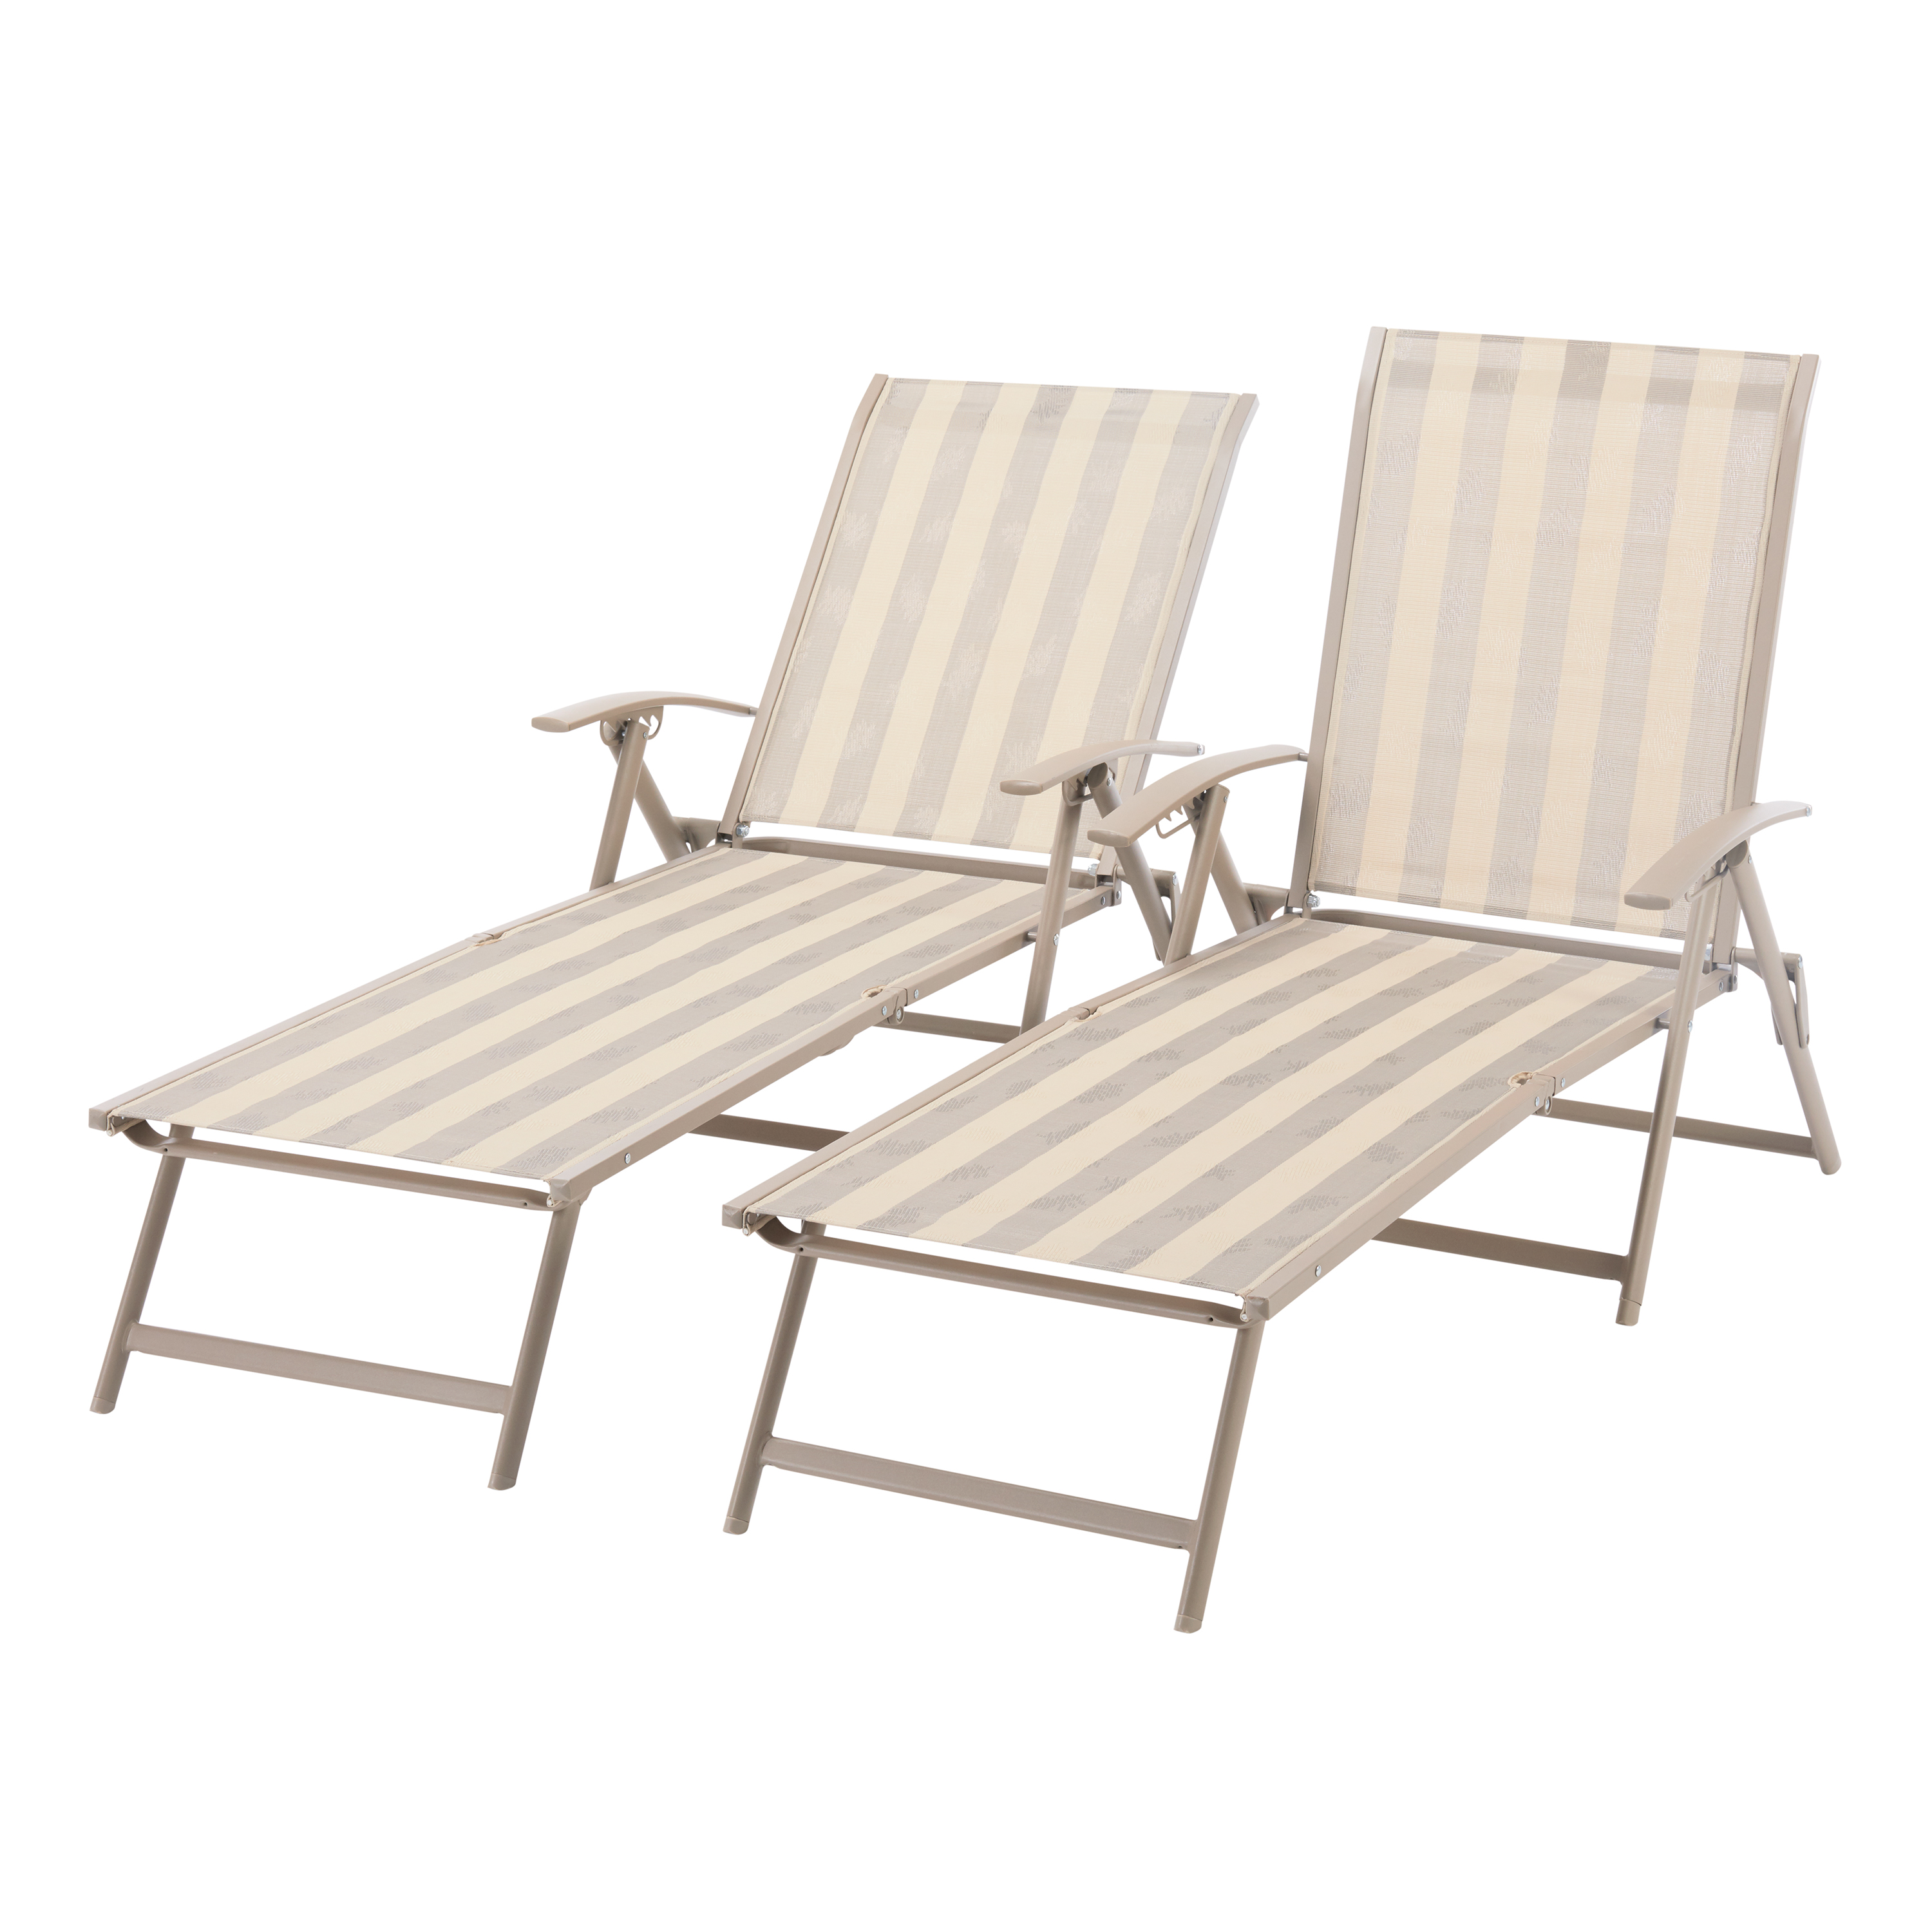 Mainstays Fair Park Foldable Steel Outdoor Chaise Lounge - Set of 2, Multiple Colors - image 1 of 4